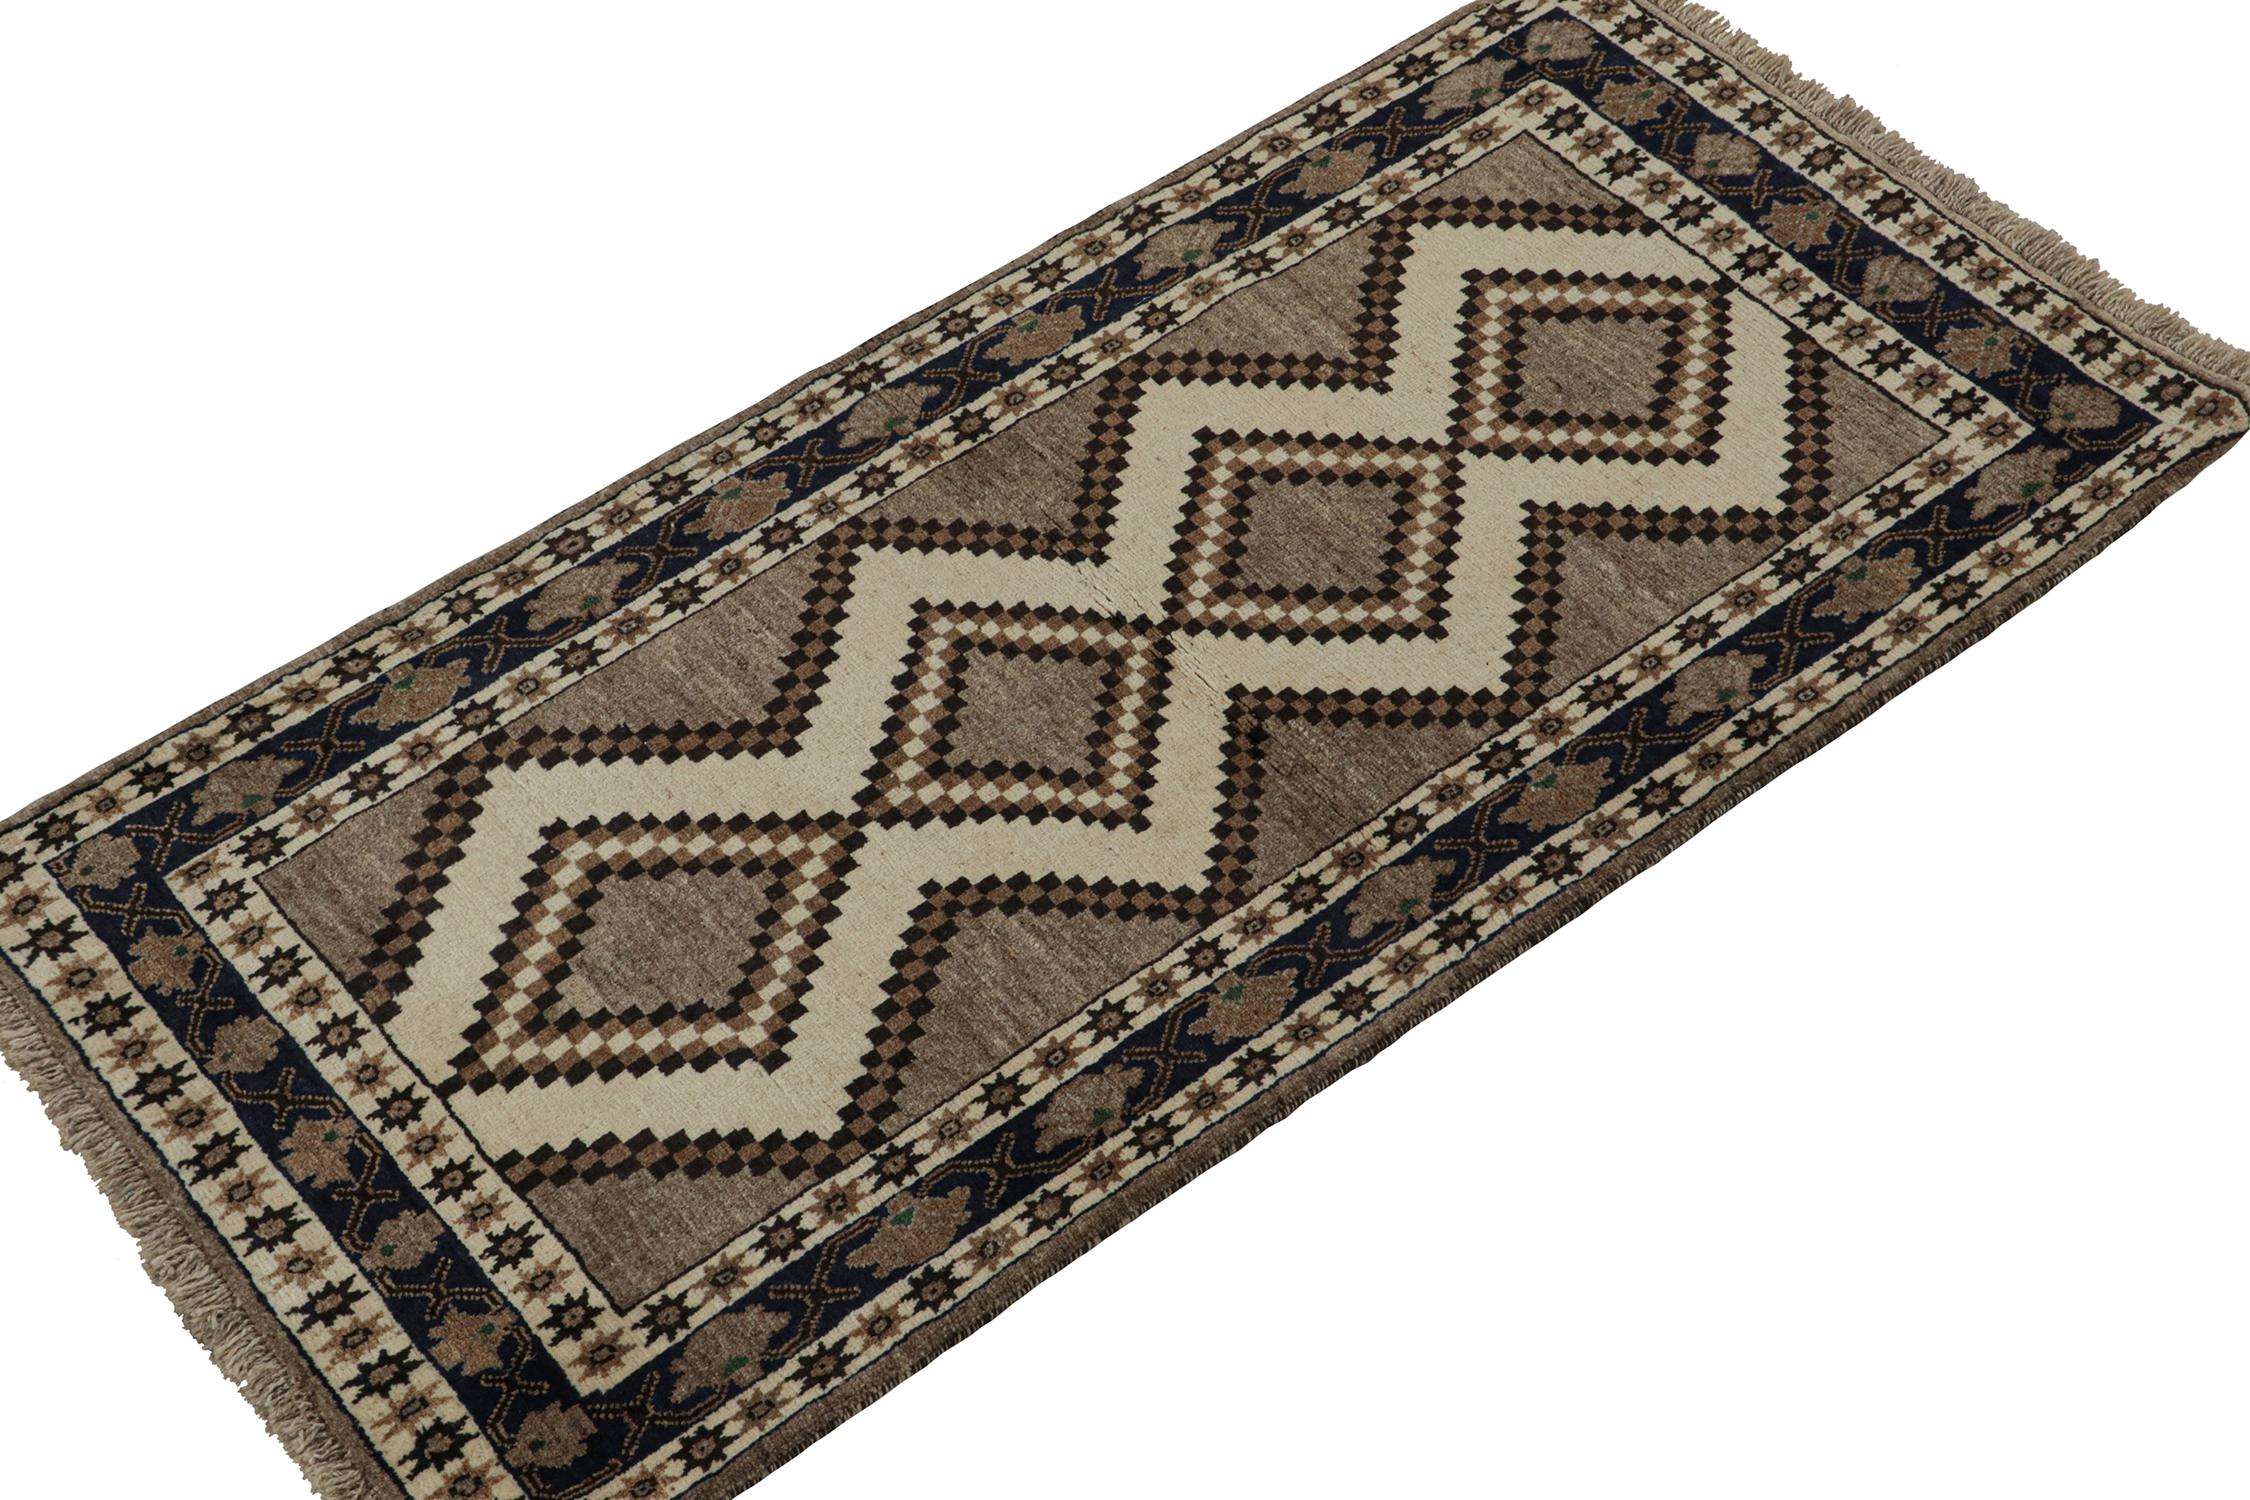 A vintage 4x7 Persian Gabbeh rug, from the latest grand entry to Rug & Kilim’s curation of rare tribal pieces. Hand-knotted in wool circa 1950-1960.

On the Design:

This mid-century piece features beige-brown and black diamond medallions atop a